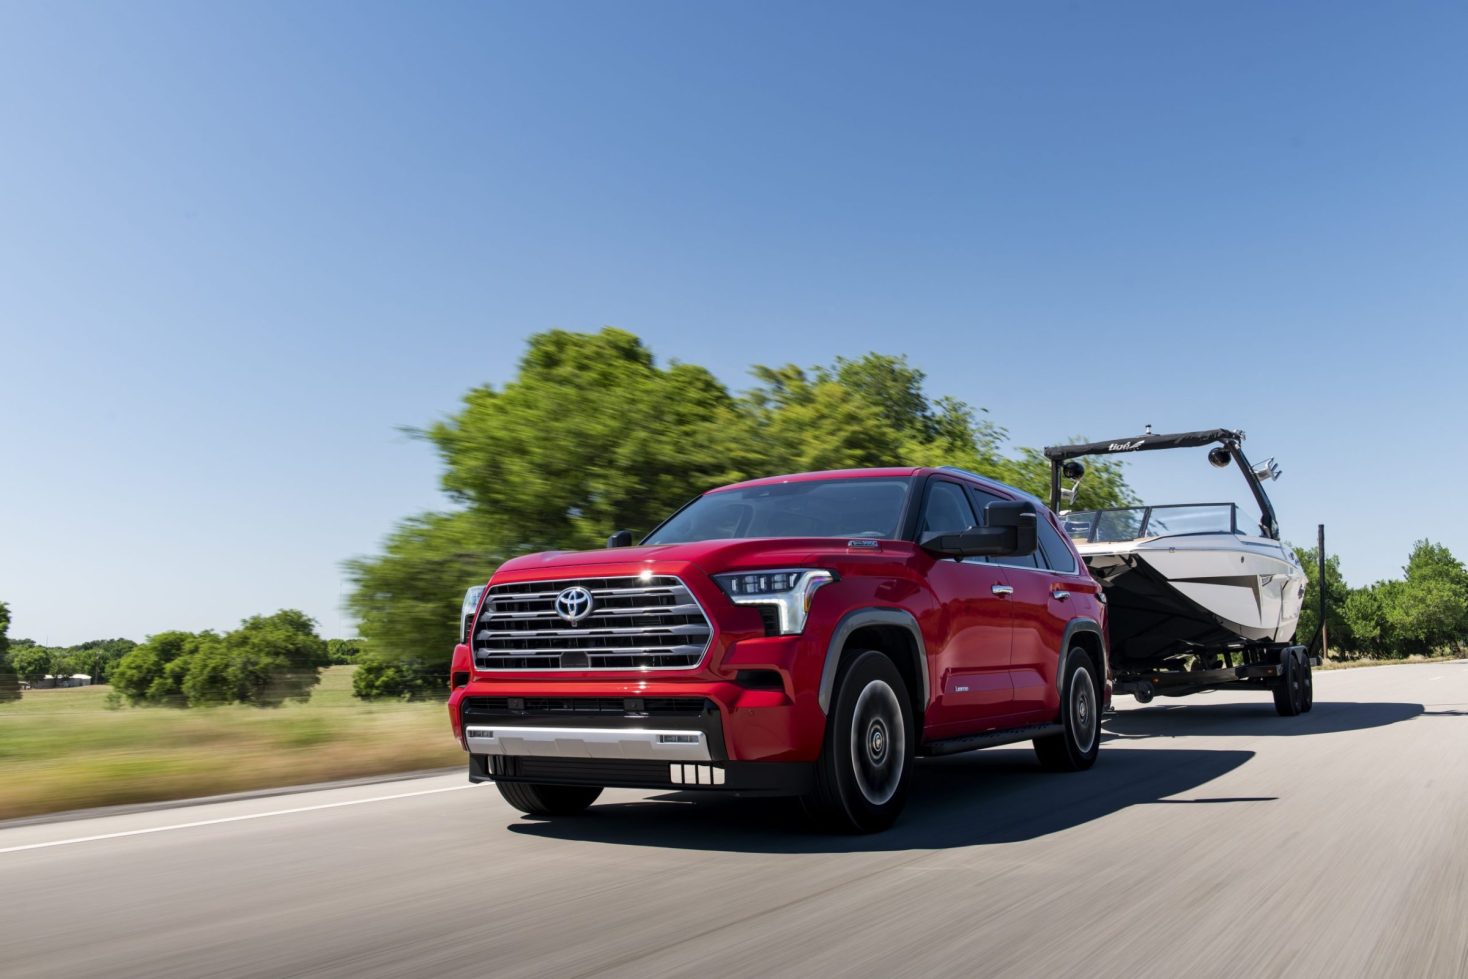 Best Features of the 2023 Sequoia SR5 Full-size SUV